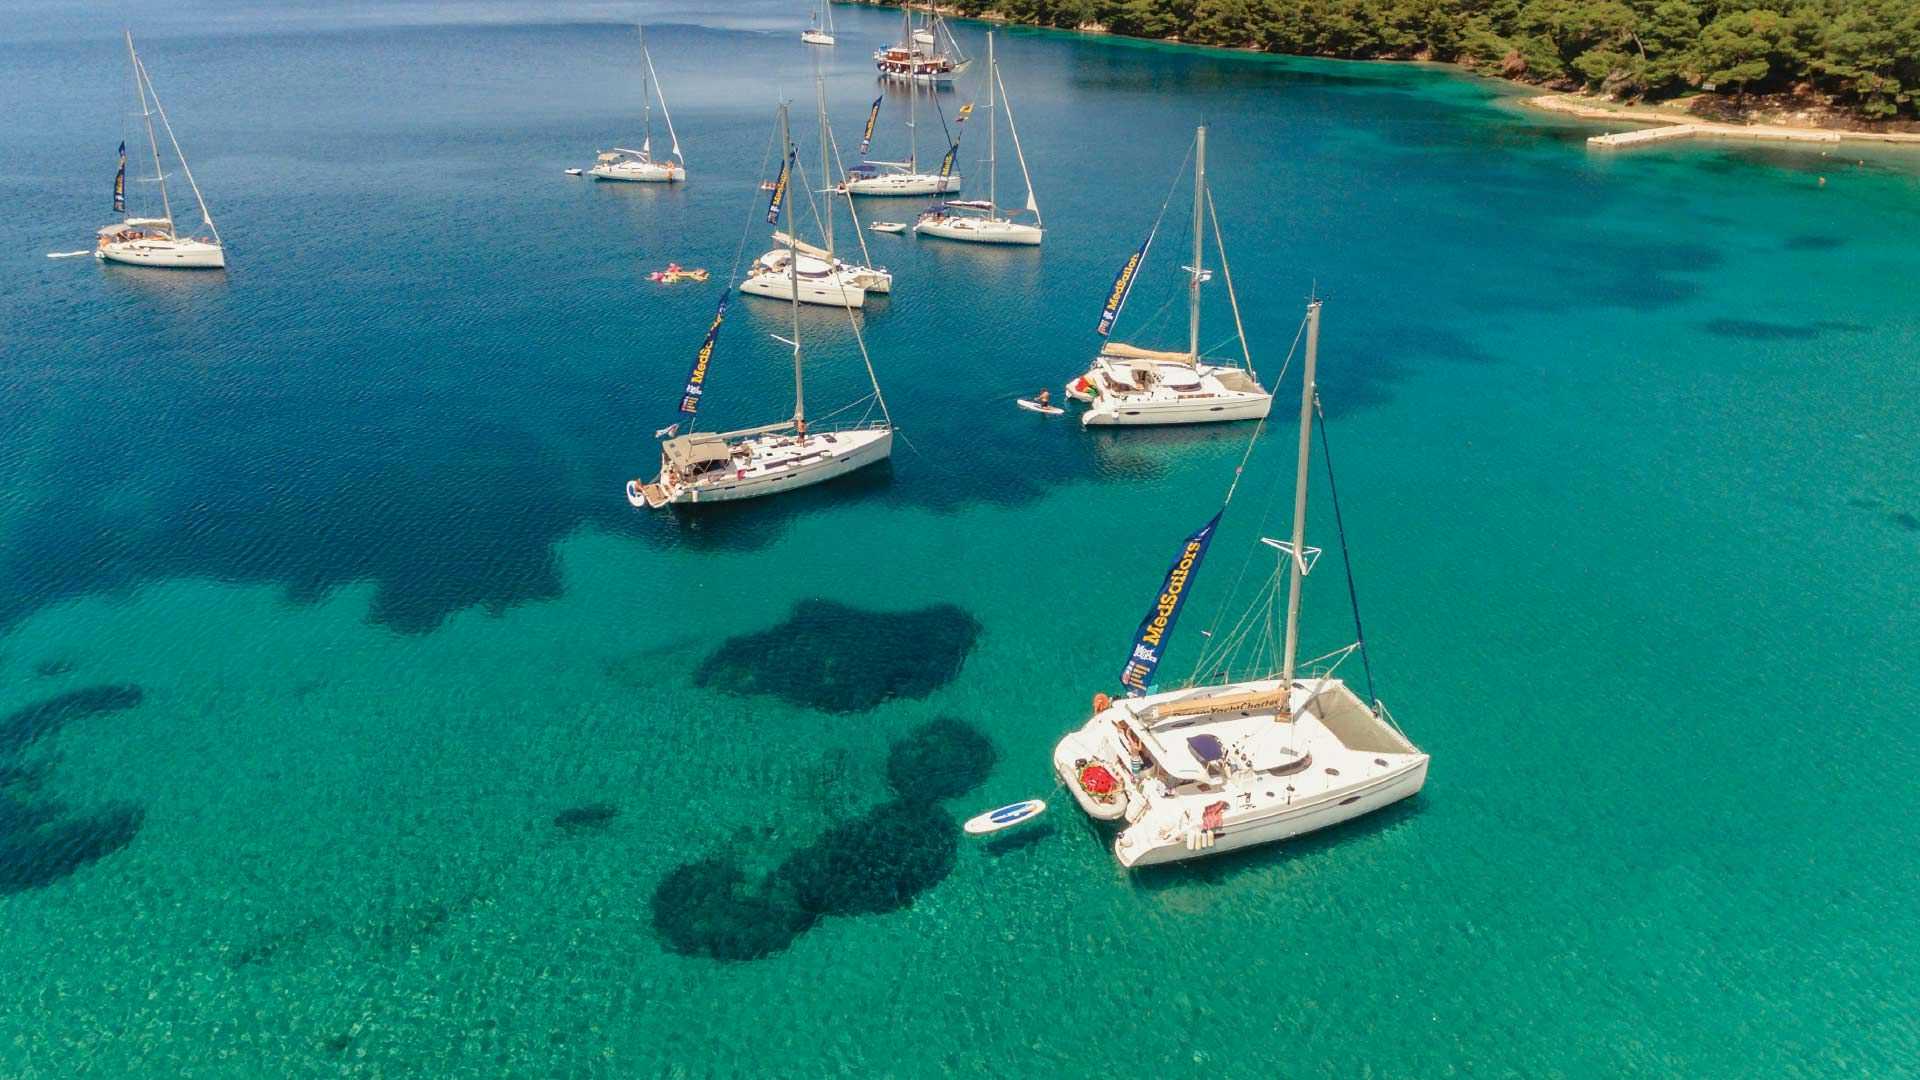 MedSailors yachts anchored in a bay in Croatia